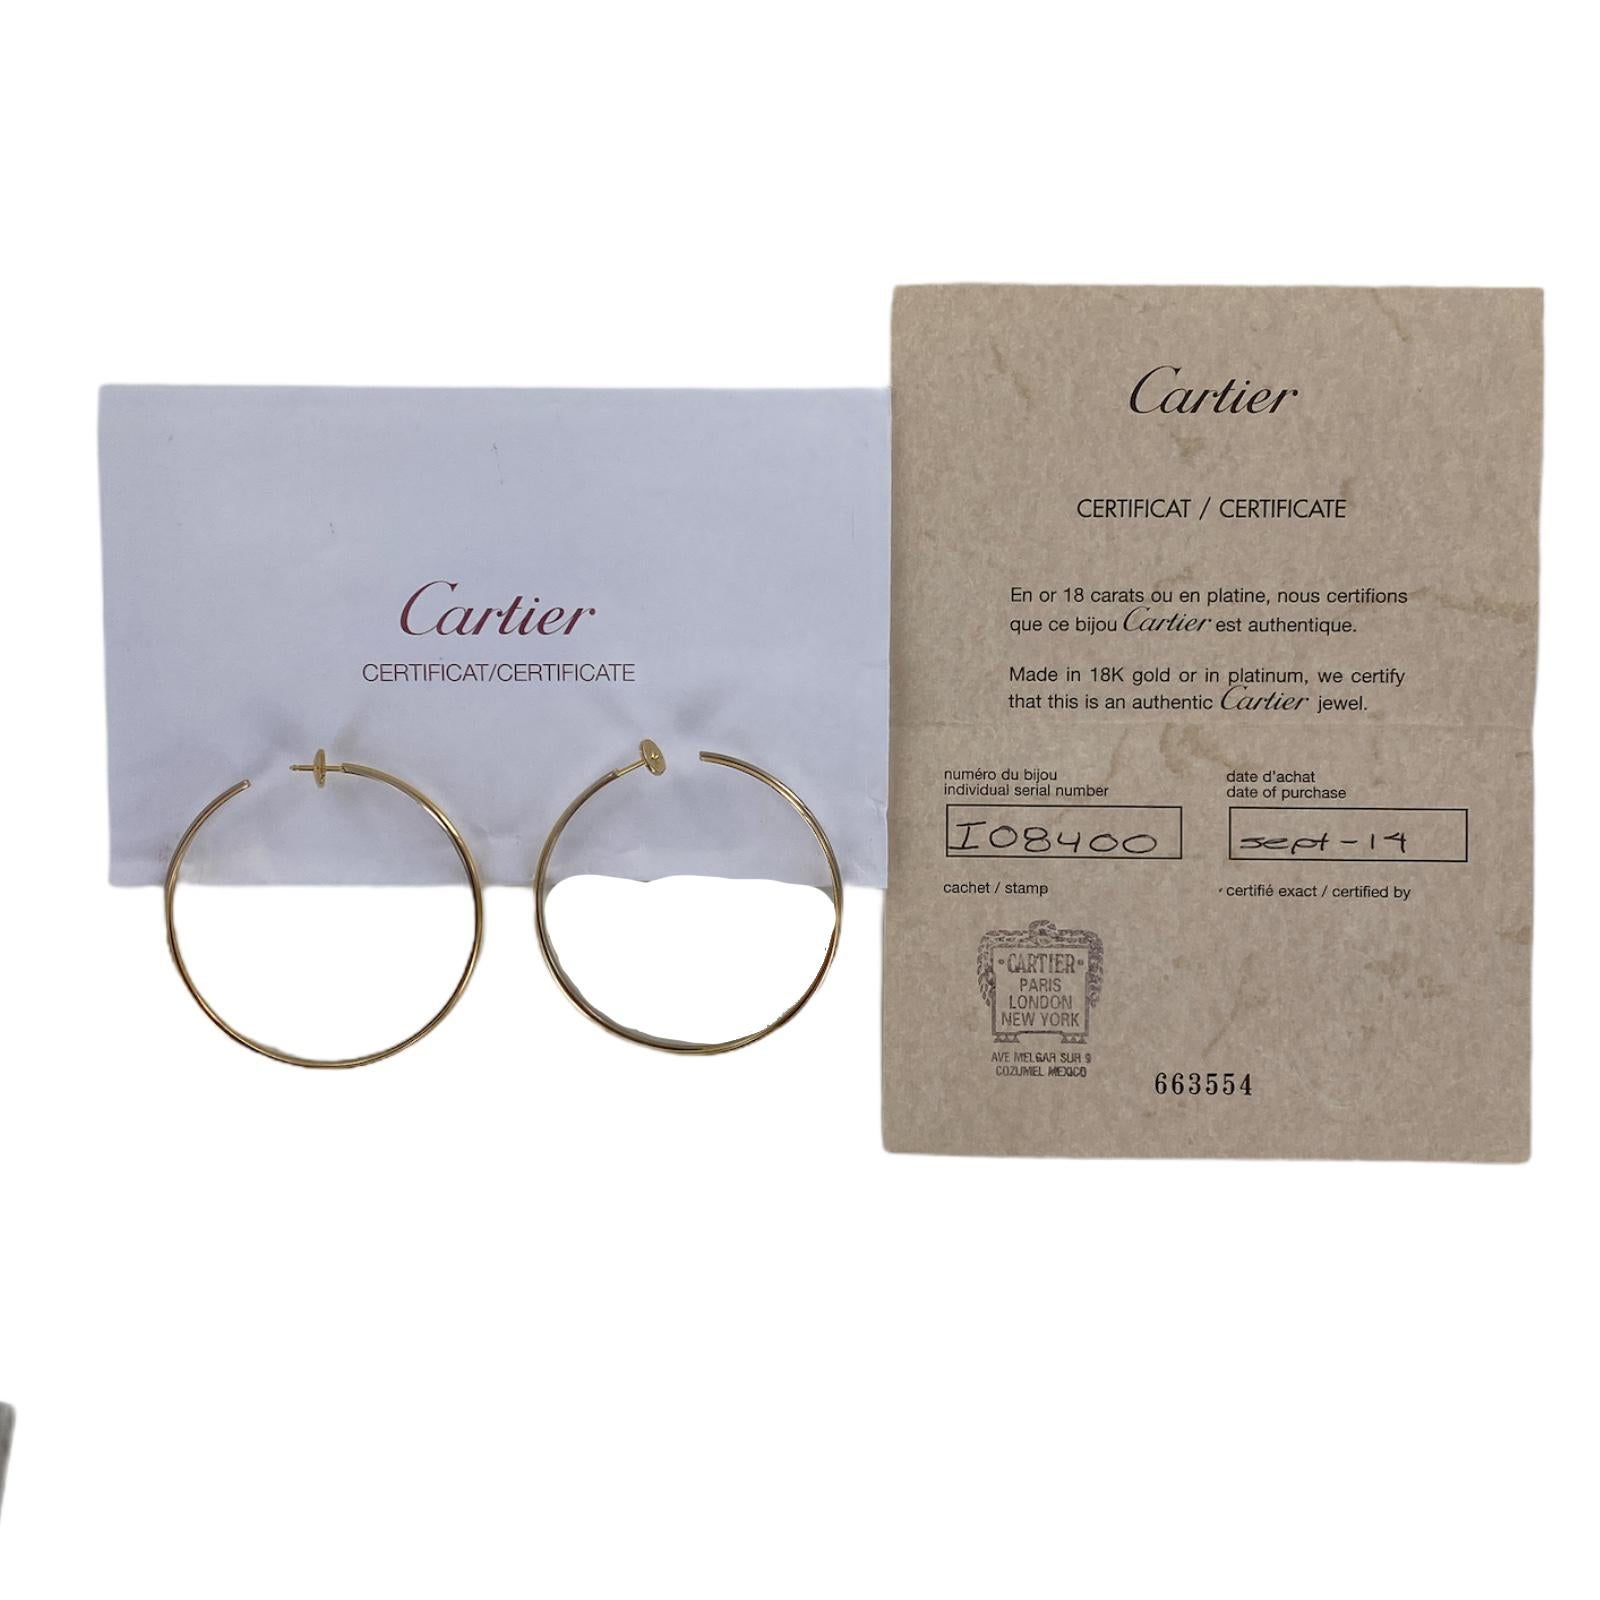 Cartier's popular Trinity hoops fashioned in 18 karat white, yellow, and rose gold. The large hoop earrings measure 2.25 inches in diameter, are light weight, and feature Cartier's original La Pousette backs. The earrings are signed Cartier 750,